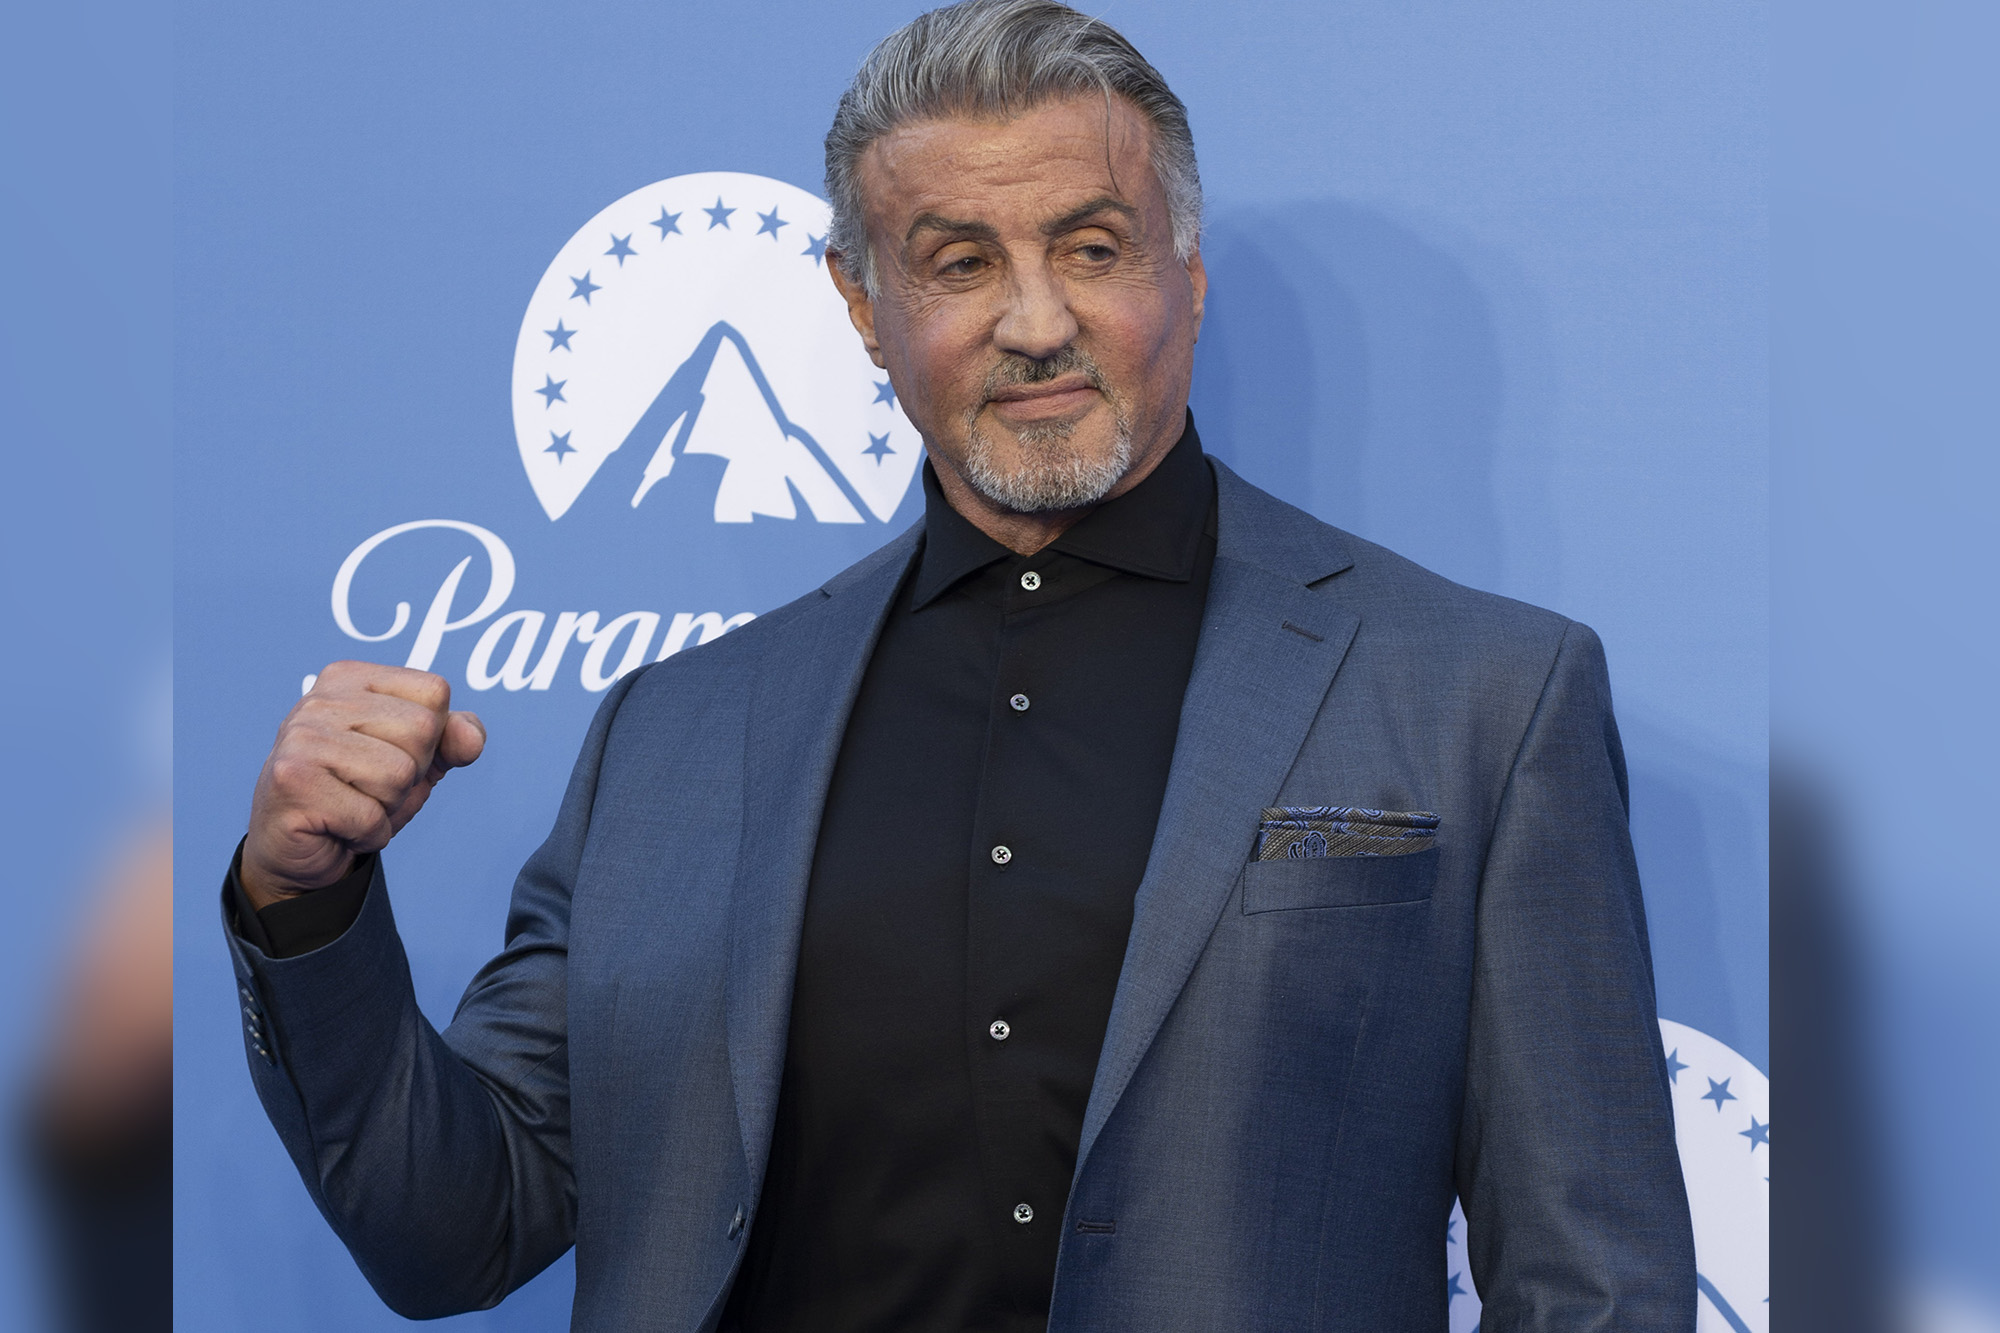 Sylvester Stallone attends the Paramount+ launch event.